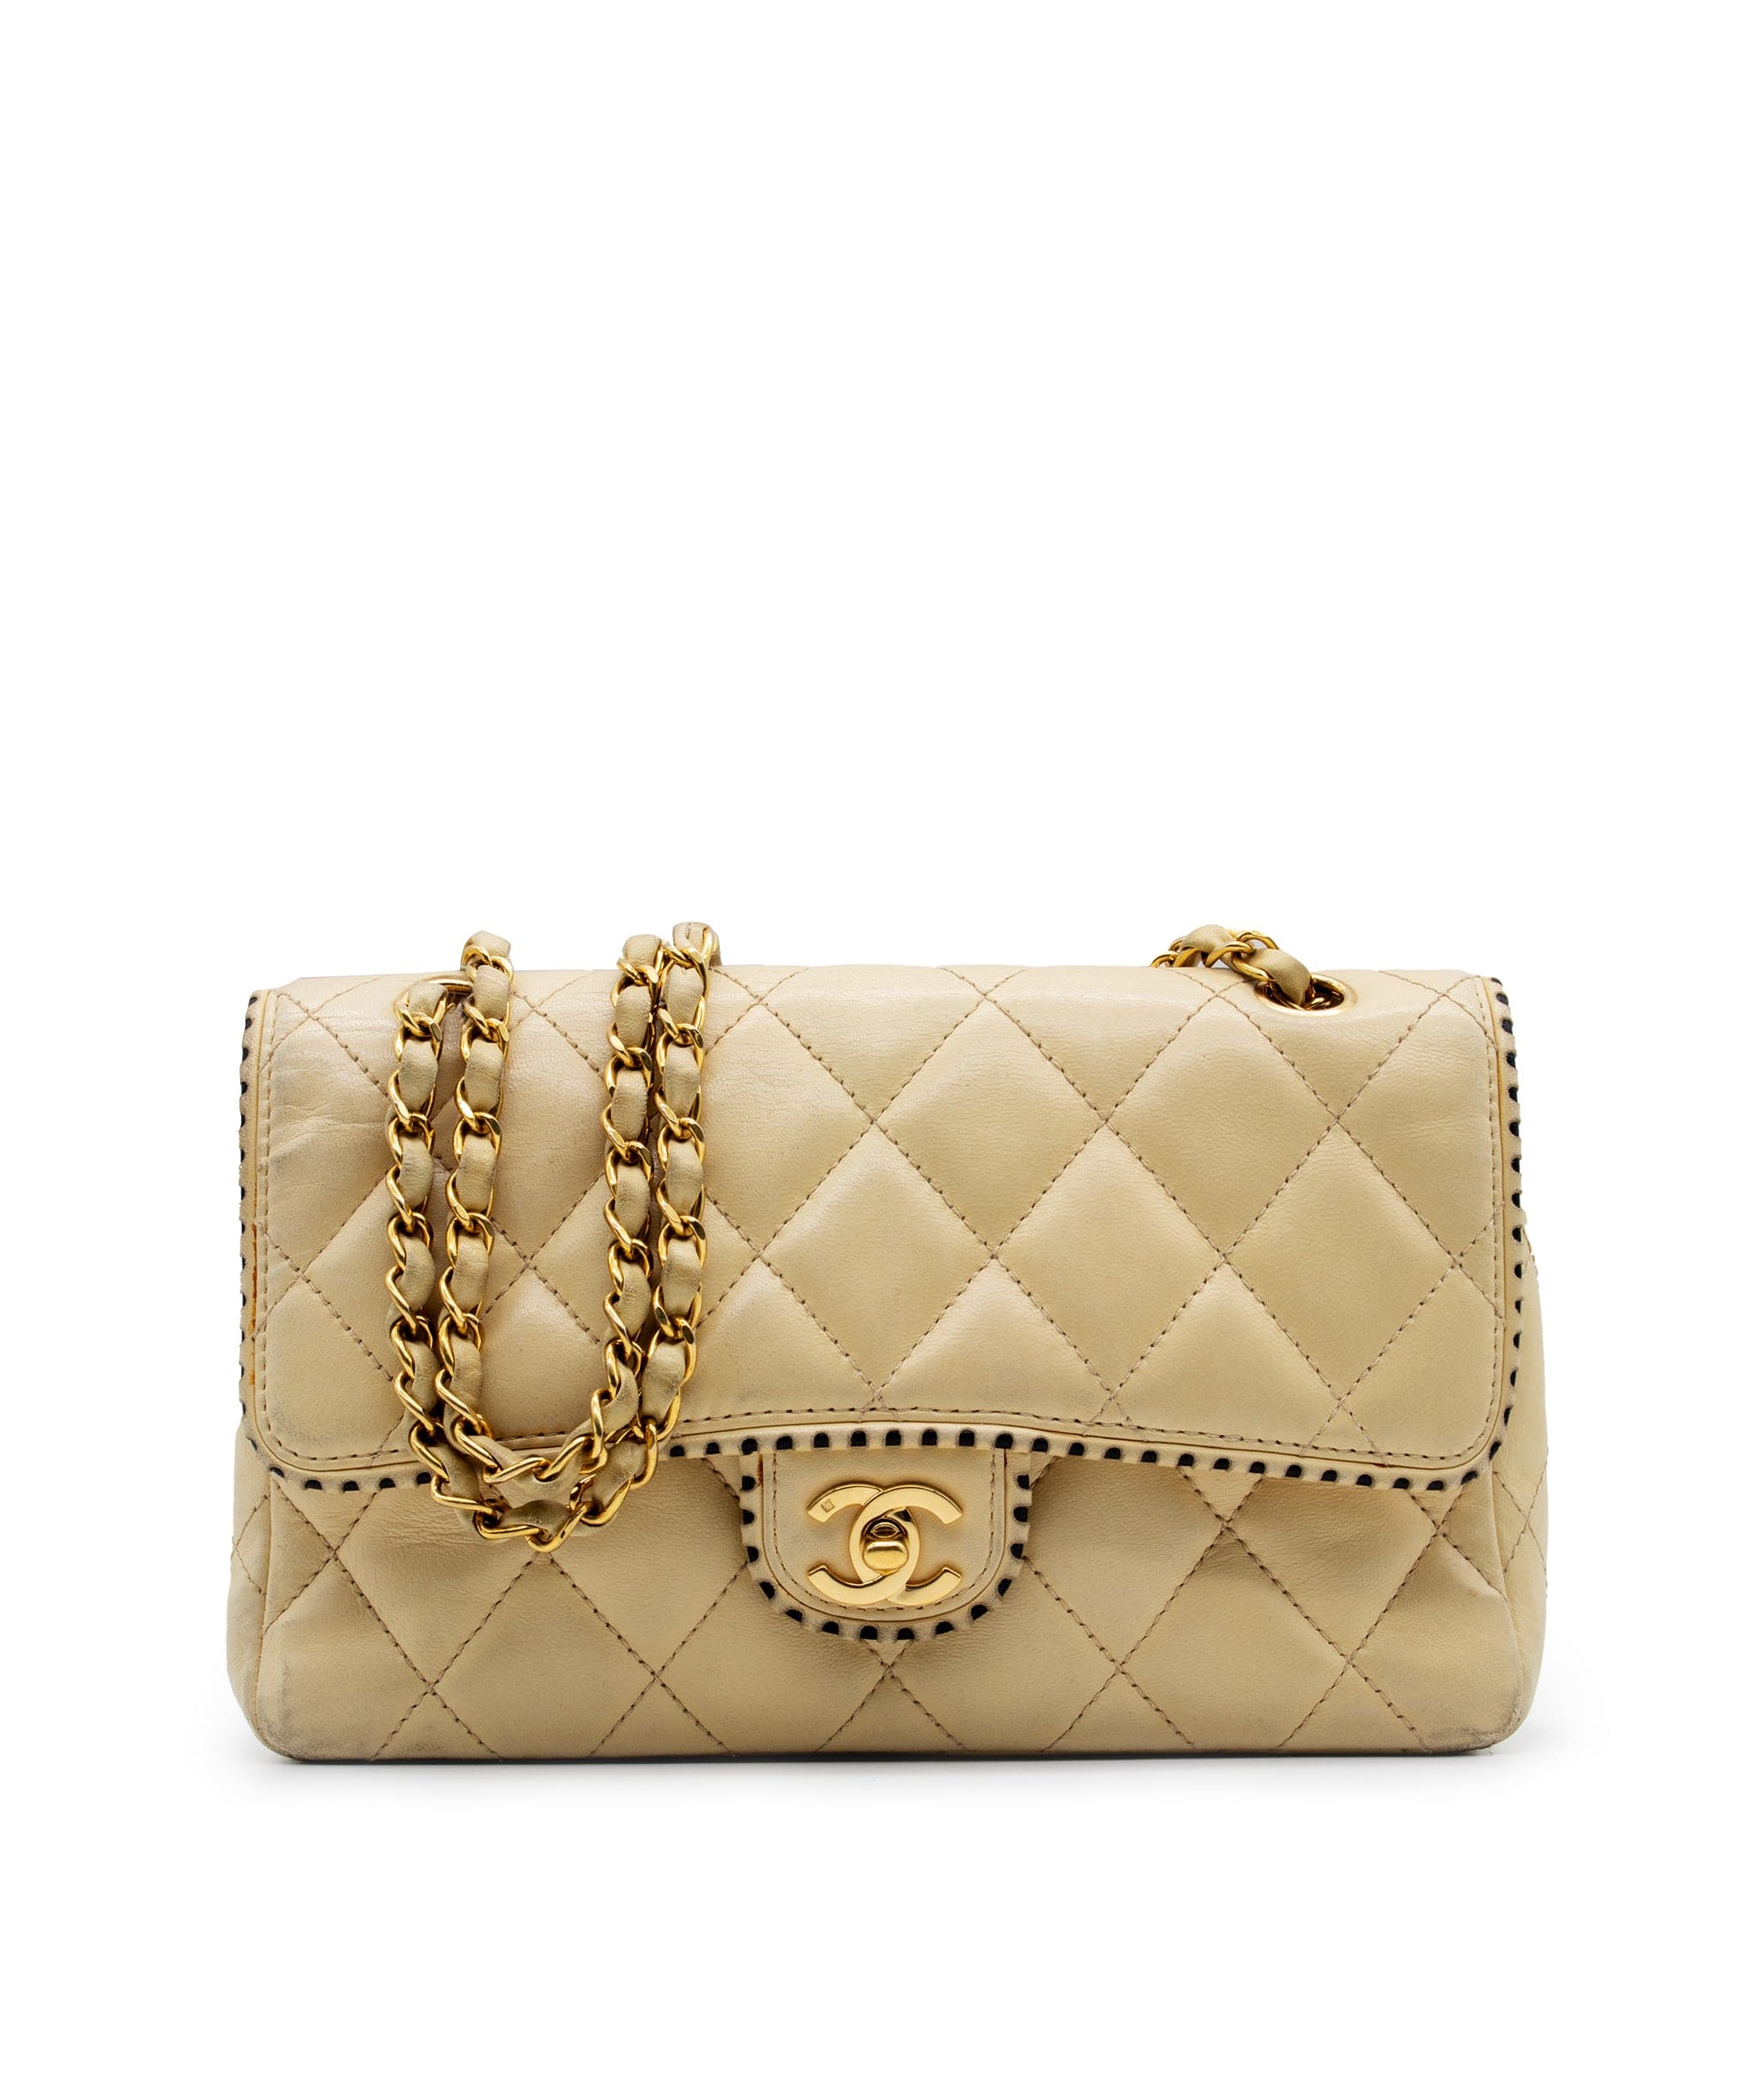 Chanel Chanel Vintage Beige Matalasse Bag with contrast Black Stitching with GHW - AWC1257